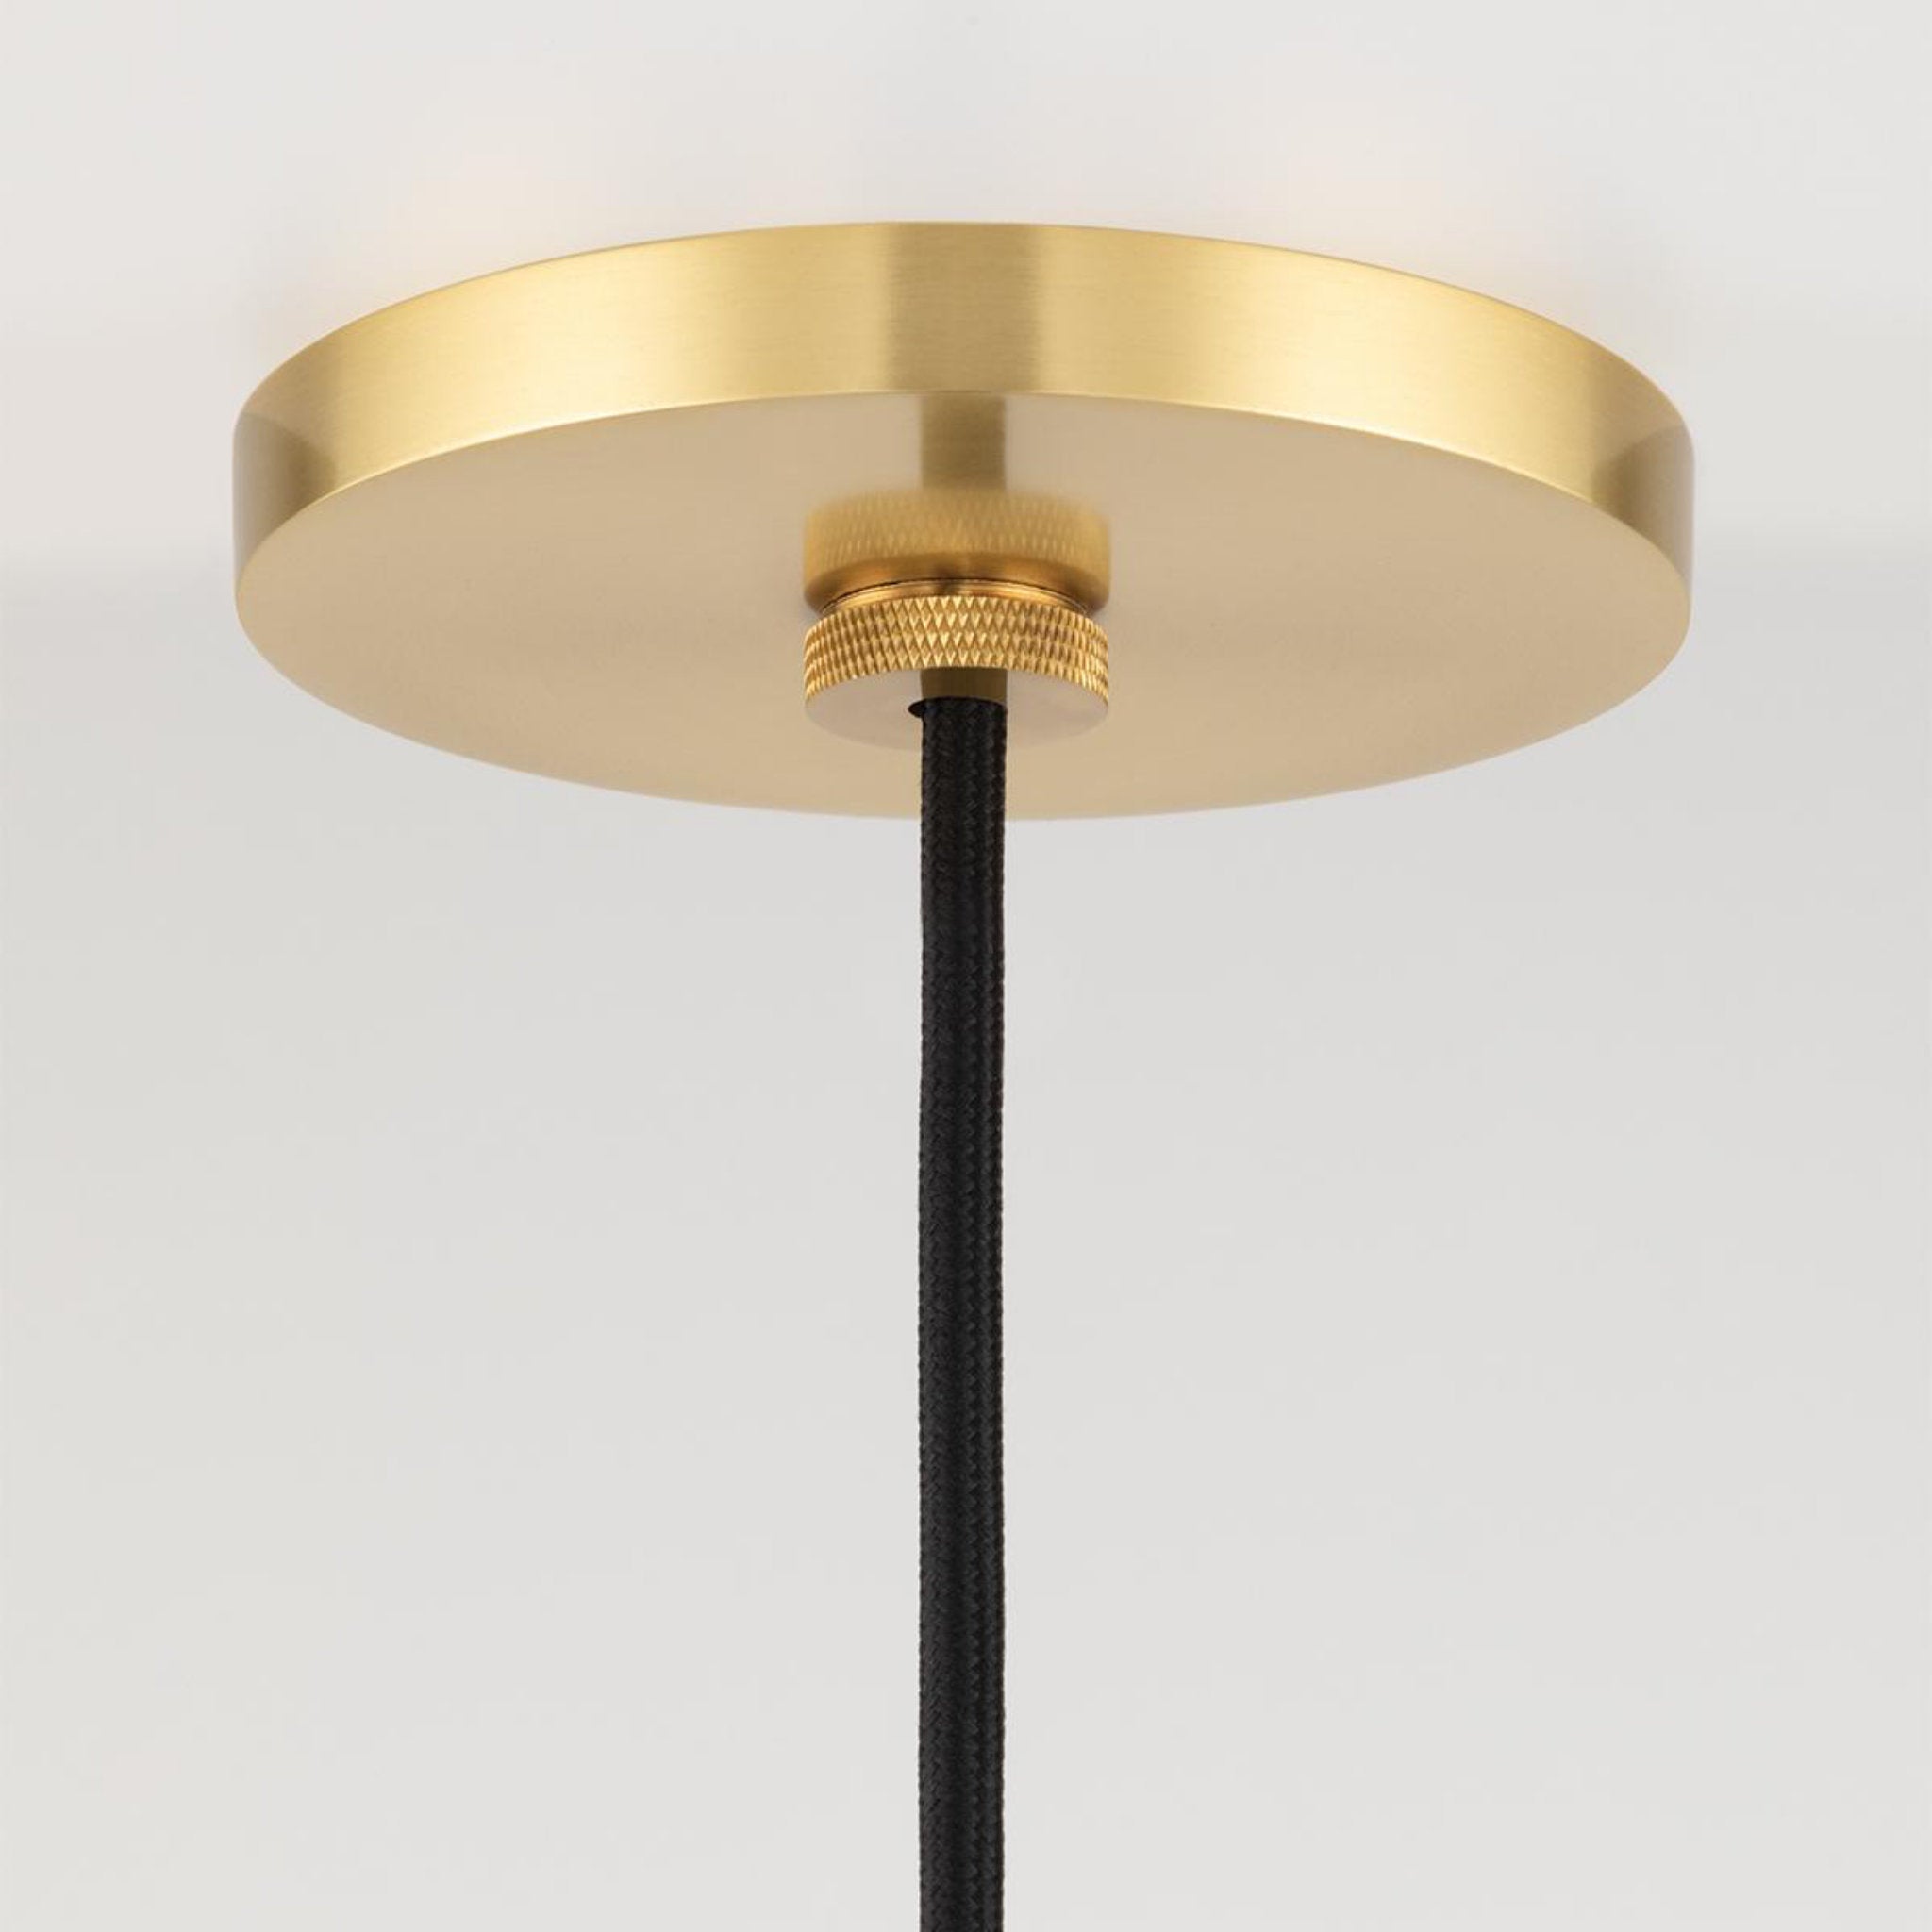 Stella 1-Light Wall Sconce in Aged Brass